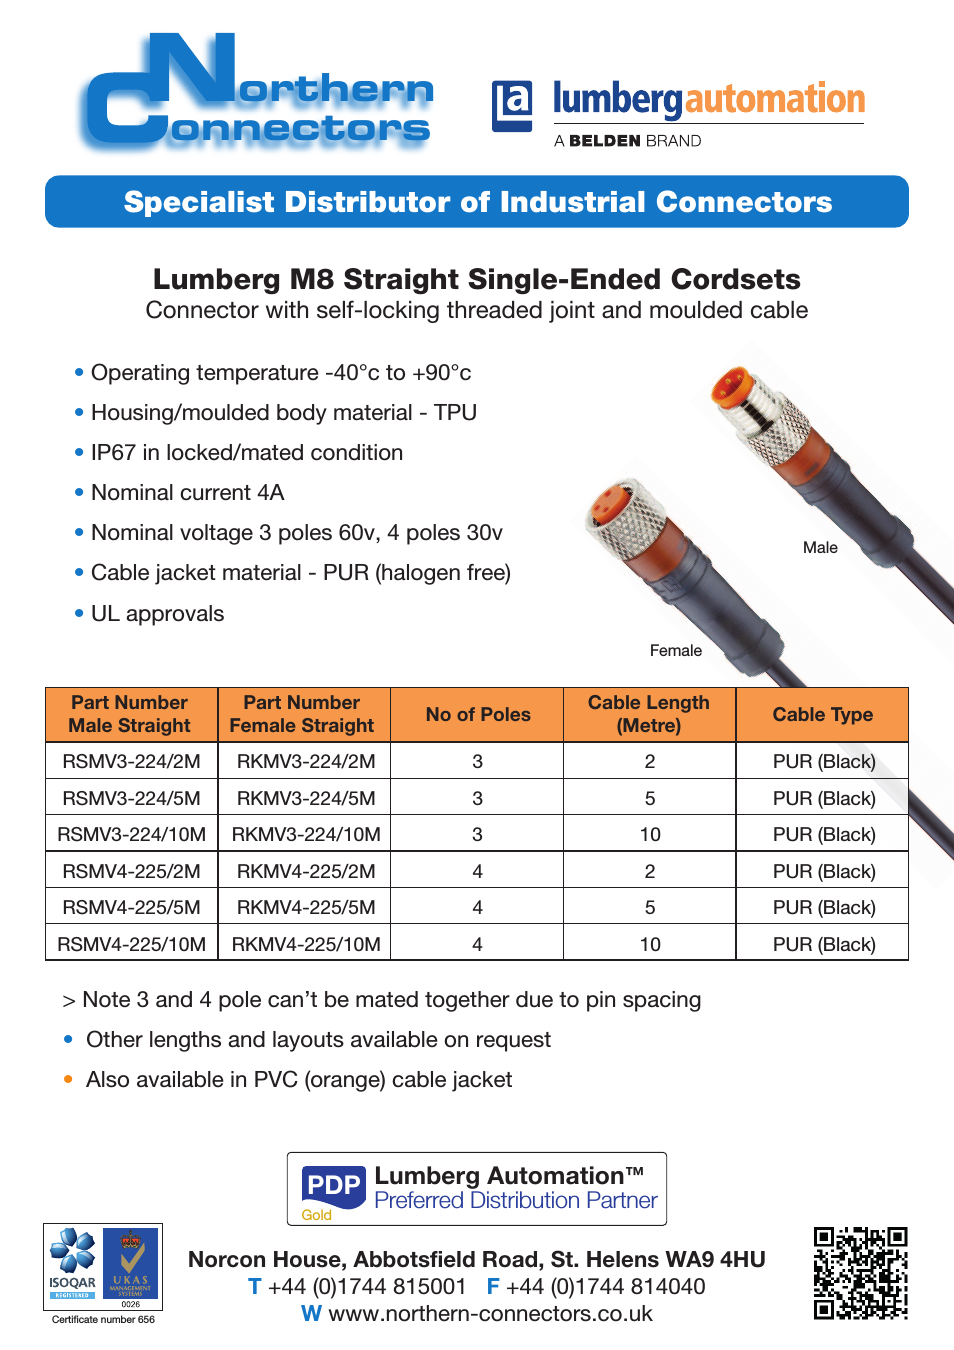 Lumberg Automation M8 Single-Ended Cordsets